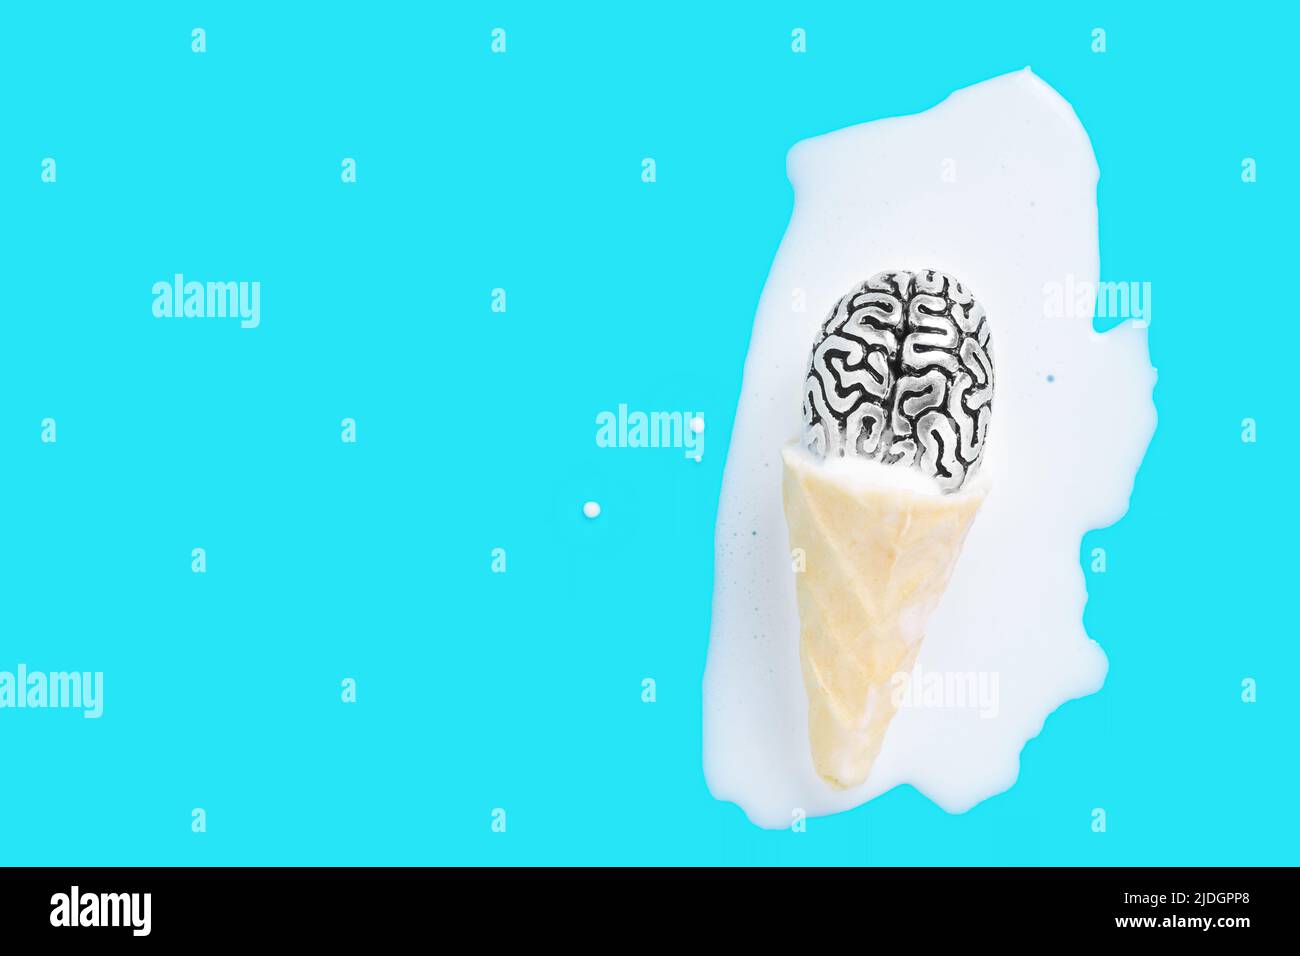 Steel copy of a human brain in melted waffle cone ice cream puddle on a blue background with copy space. Extreme hot summer concept. Stock Photo